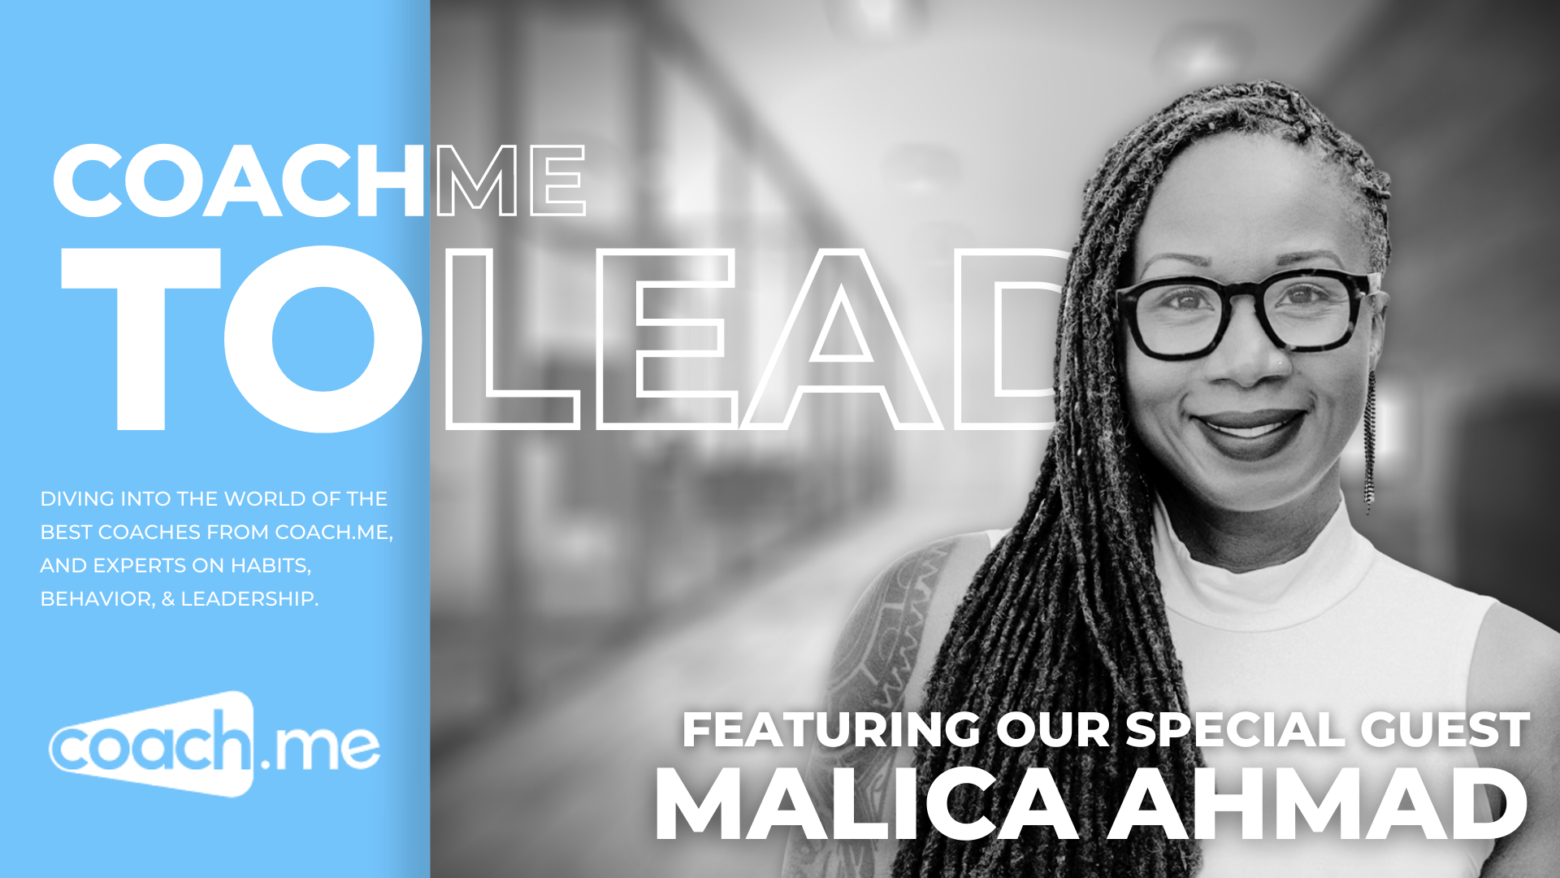 Malica Ahmad on coaching and mentoring high-performance teams